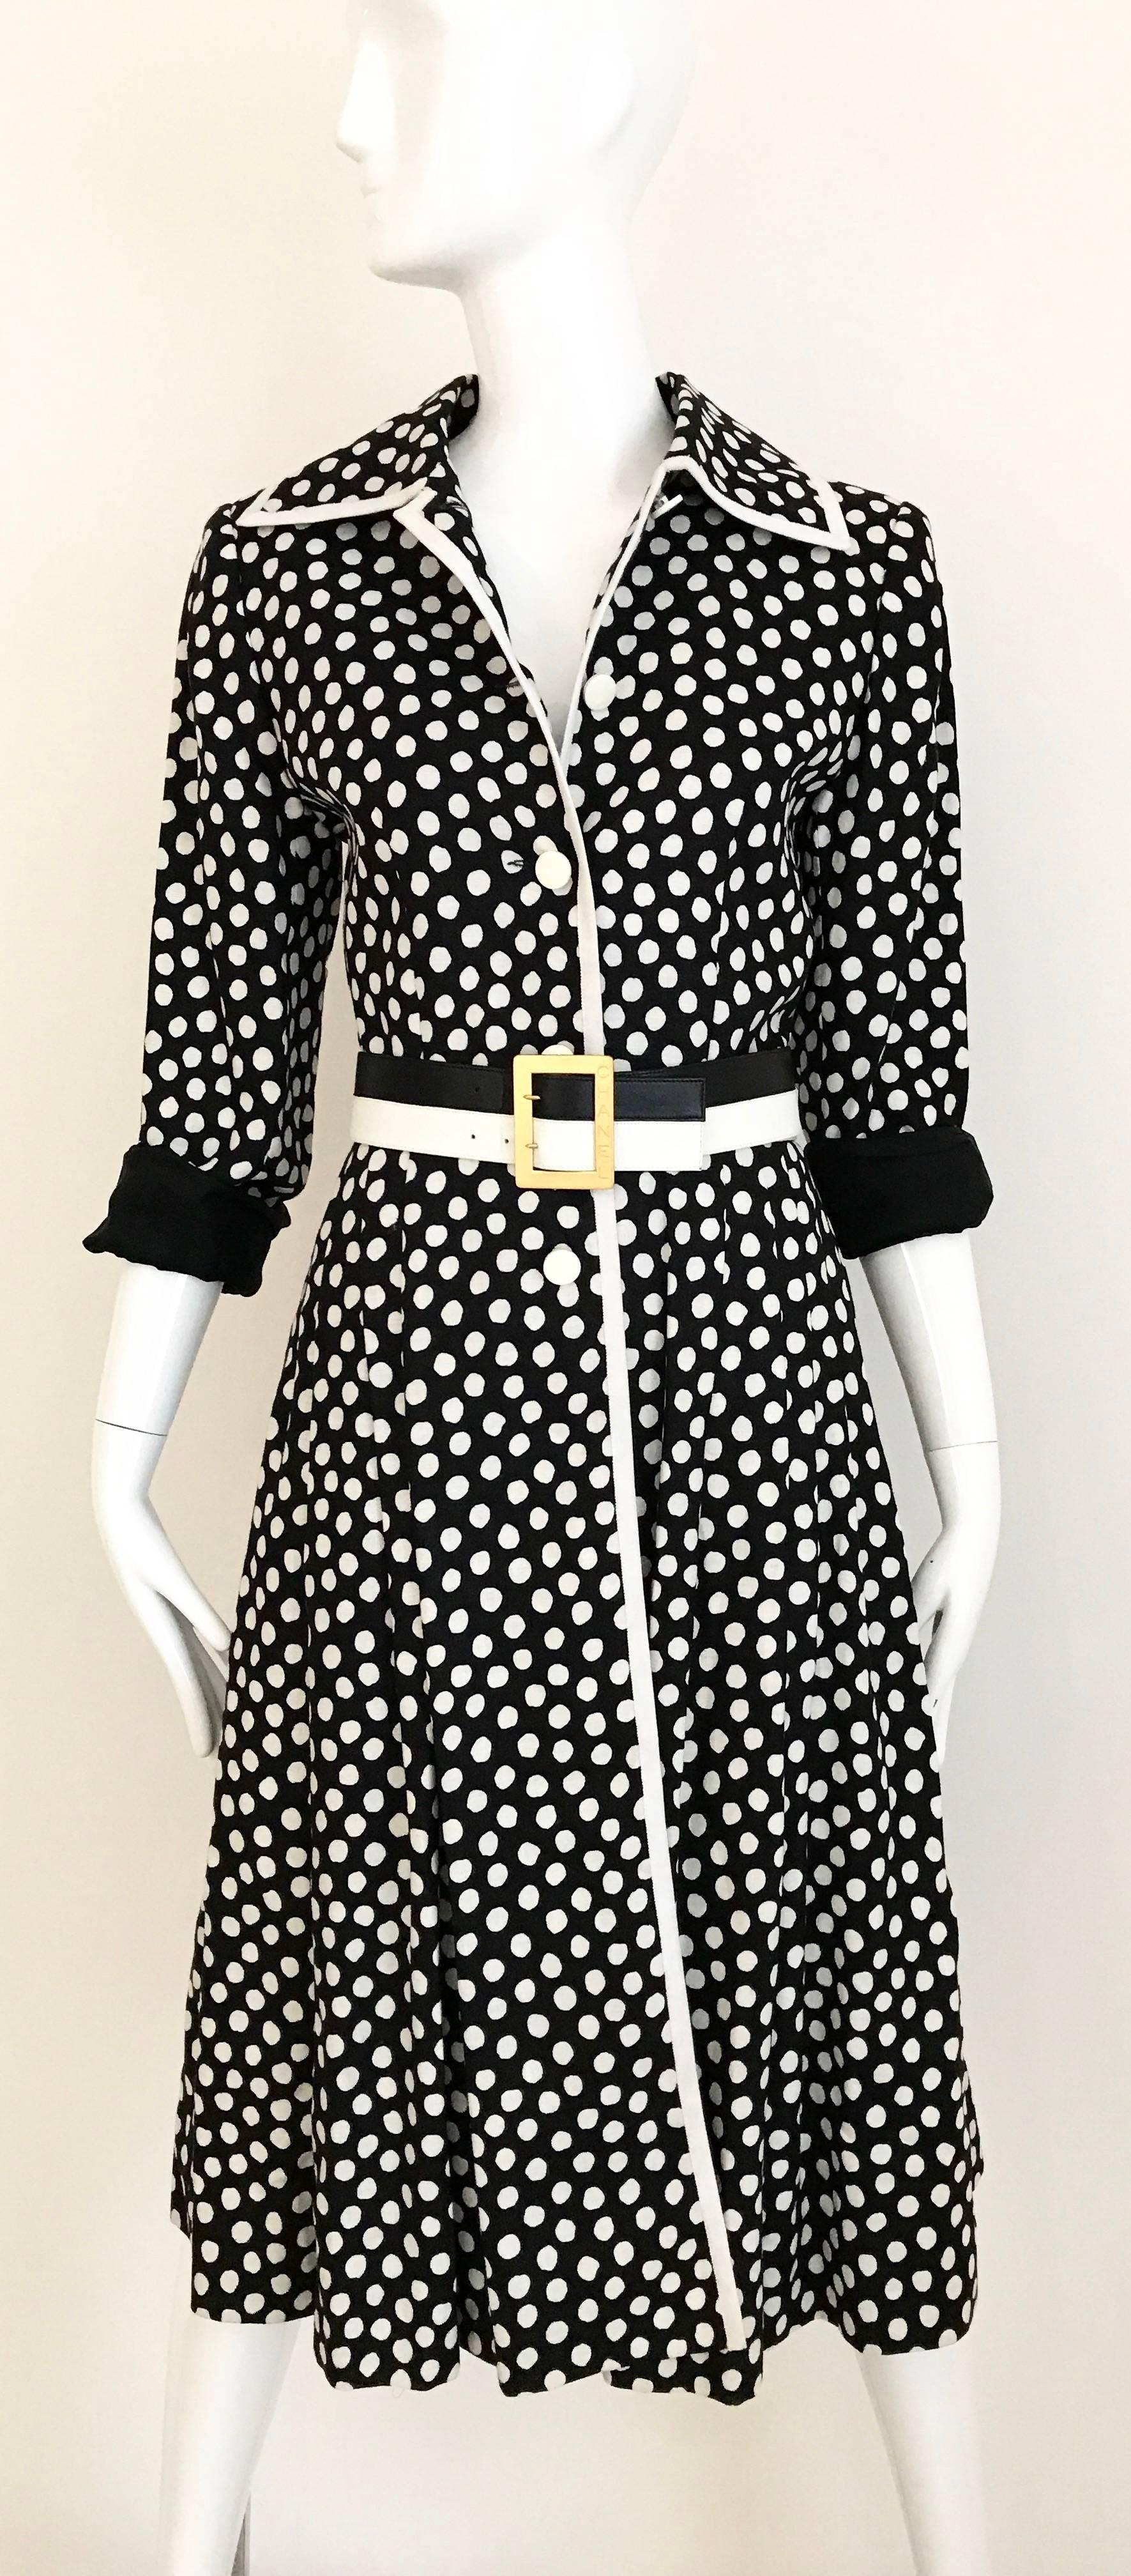 Vintage 1970s GIVENCHY Nouvelle Boutique black and White dot coat dress. 5 acrylic Button in the front and pleated skirt. Coat is made on linen and lined in silk.
You can wear this as a dress. Coat has 2 side pockets. Coat is styled with Vintage